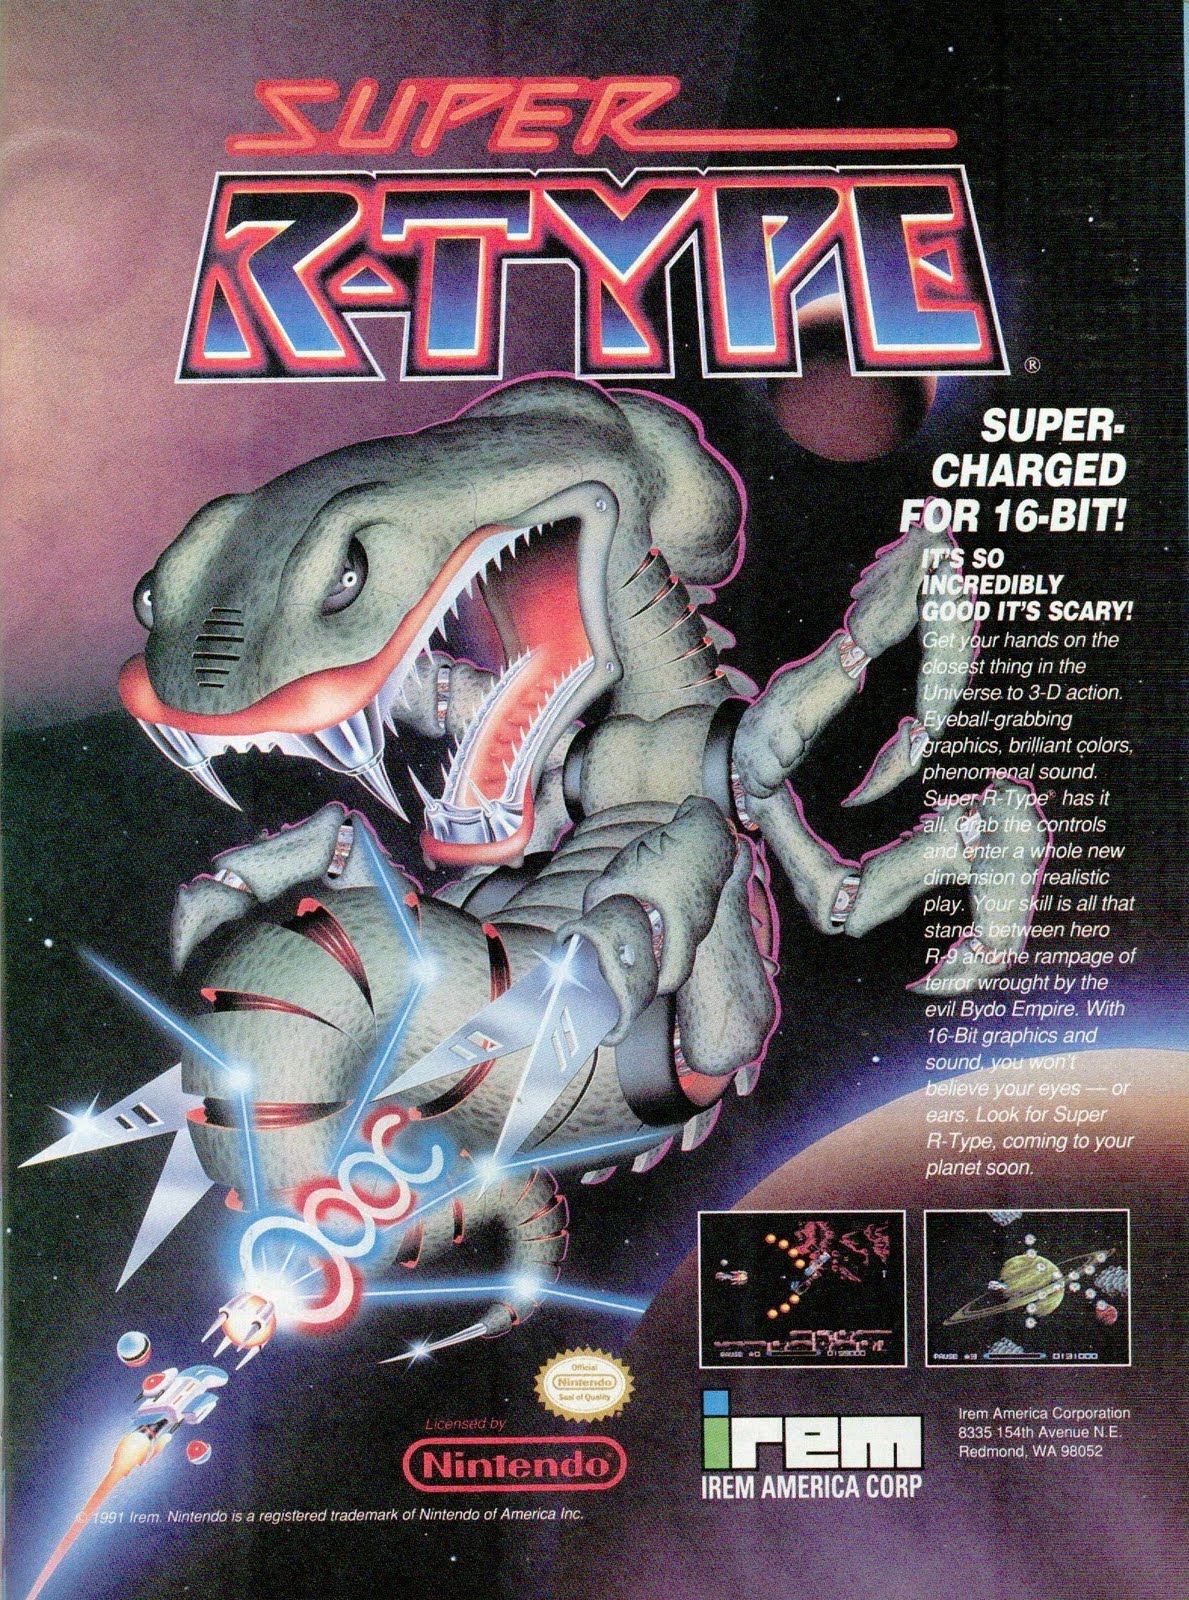 vintage gaming ads - super r type snes - Super Charged For 16Bit! It'S So Incredibly Good It'S Scary! on the r ing the S 3D action graborg raphics, colors, phenoto sound Se has contos play A gaf Wought by do Emers sound 200 D. Lorus par Ire Nintendo Bem A